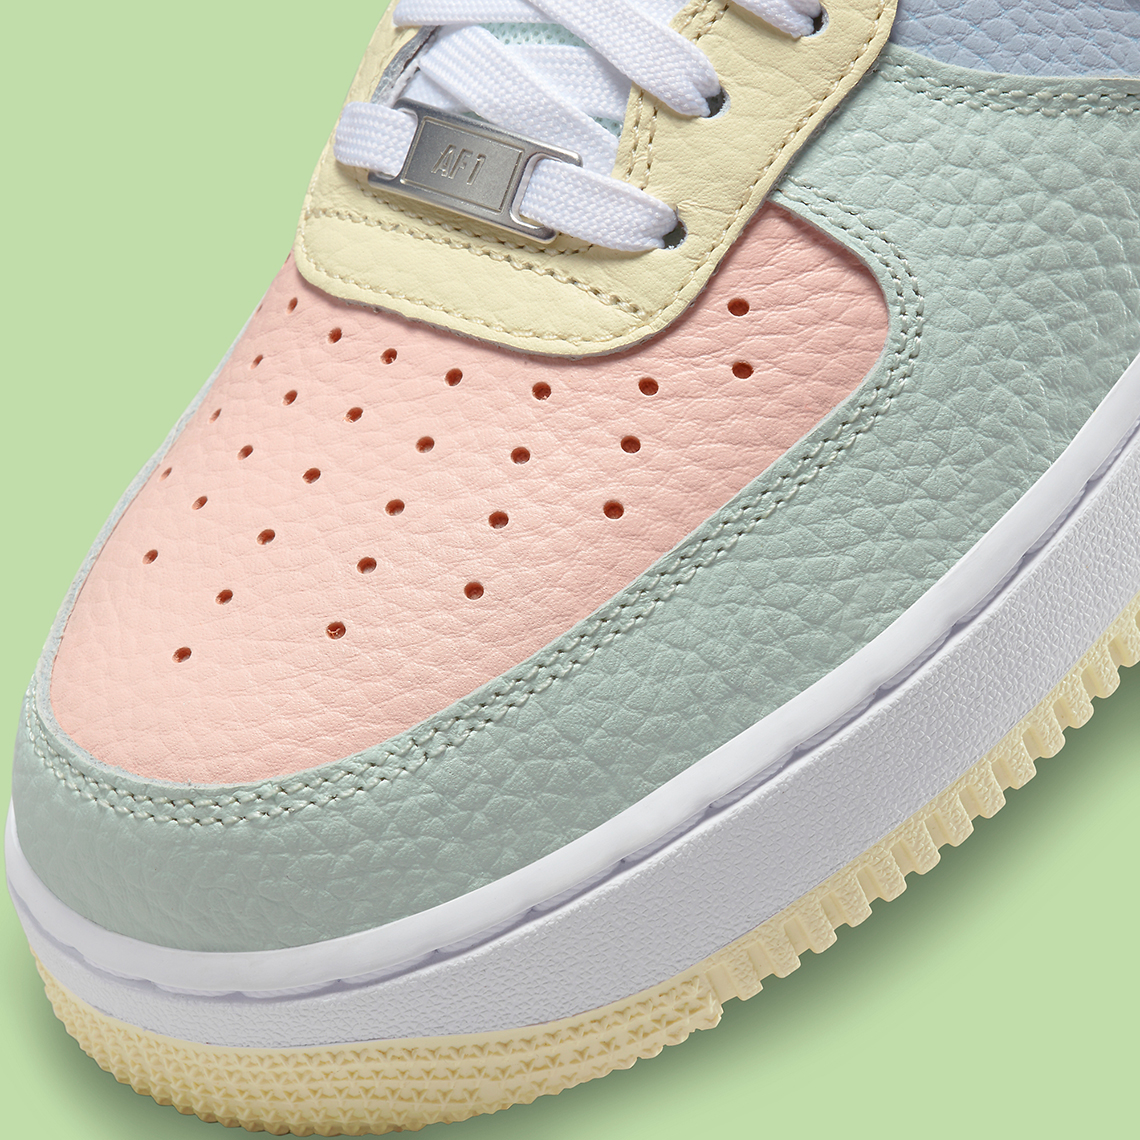 nike-air-force-1-low-easter-dr8590-600-release-date-4.jpg